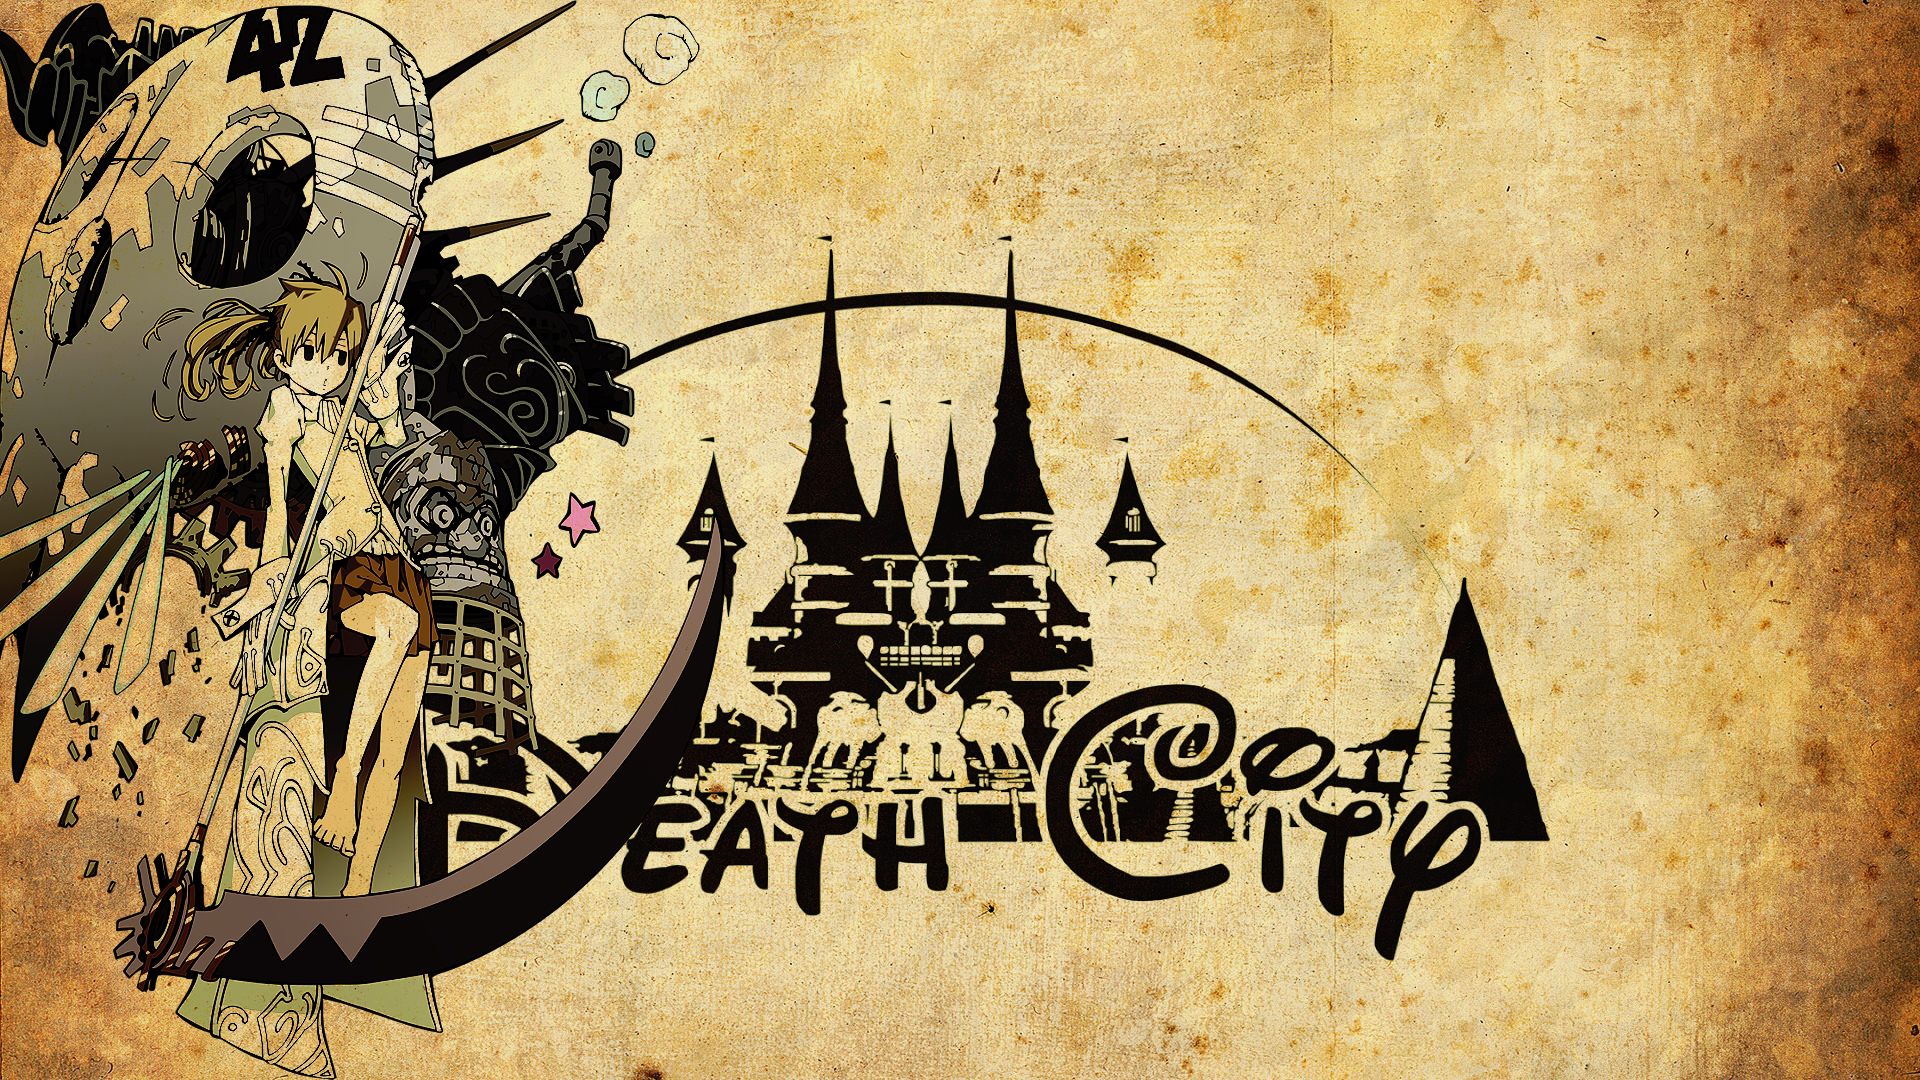 Death City - Soul Eater Wallpaper by Siimeo on DeviantArt